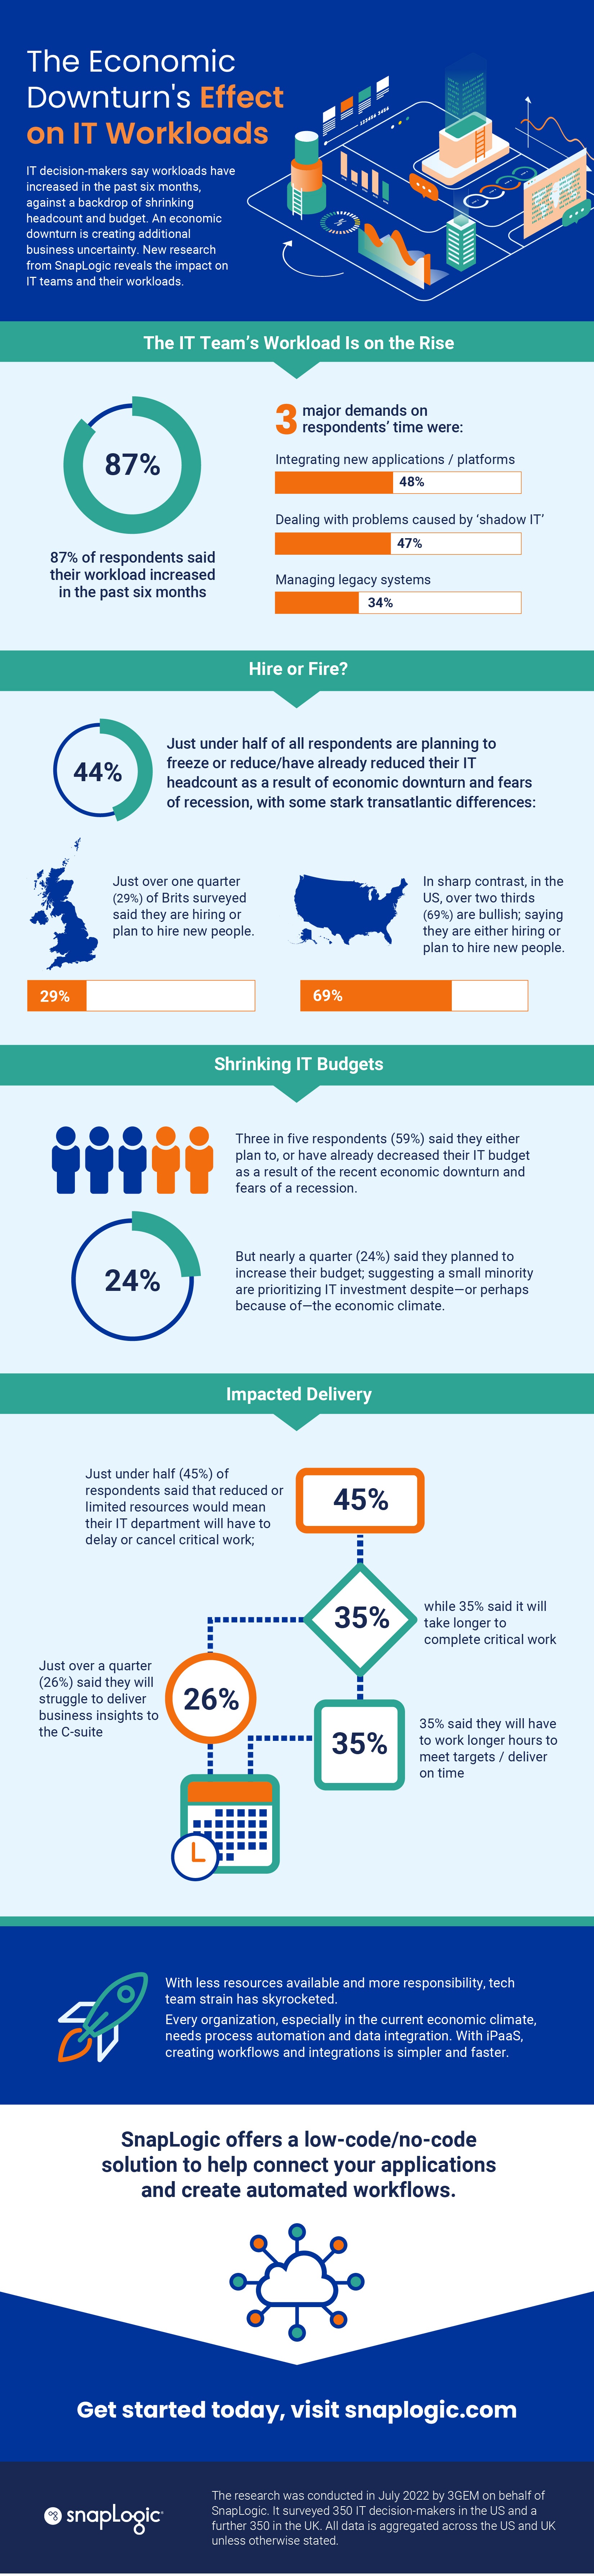 The Economic Downturn's Effect on IT Workloads Infographic